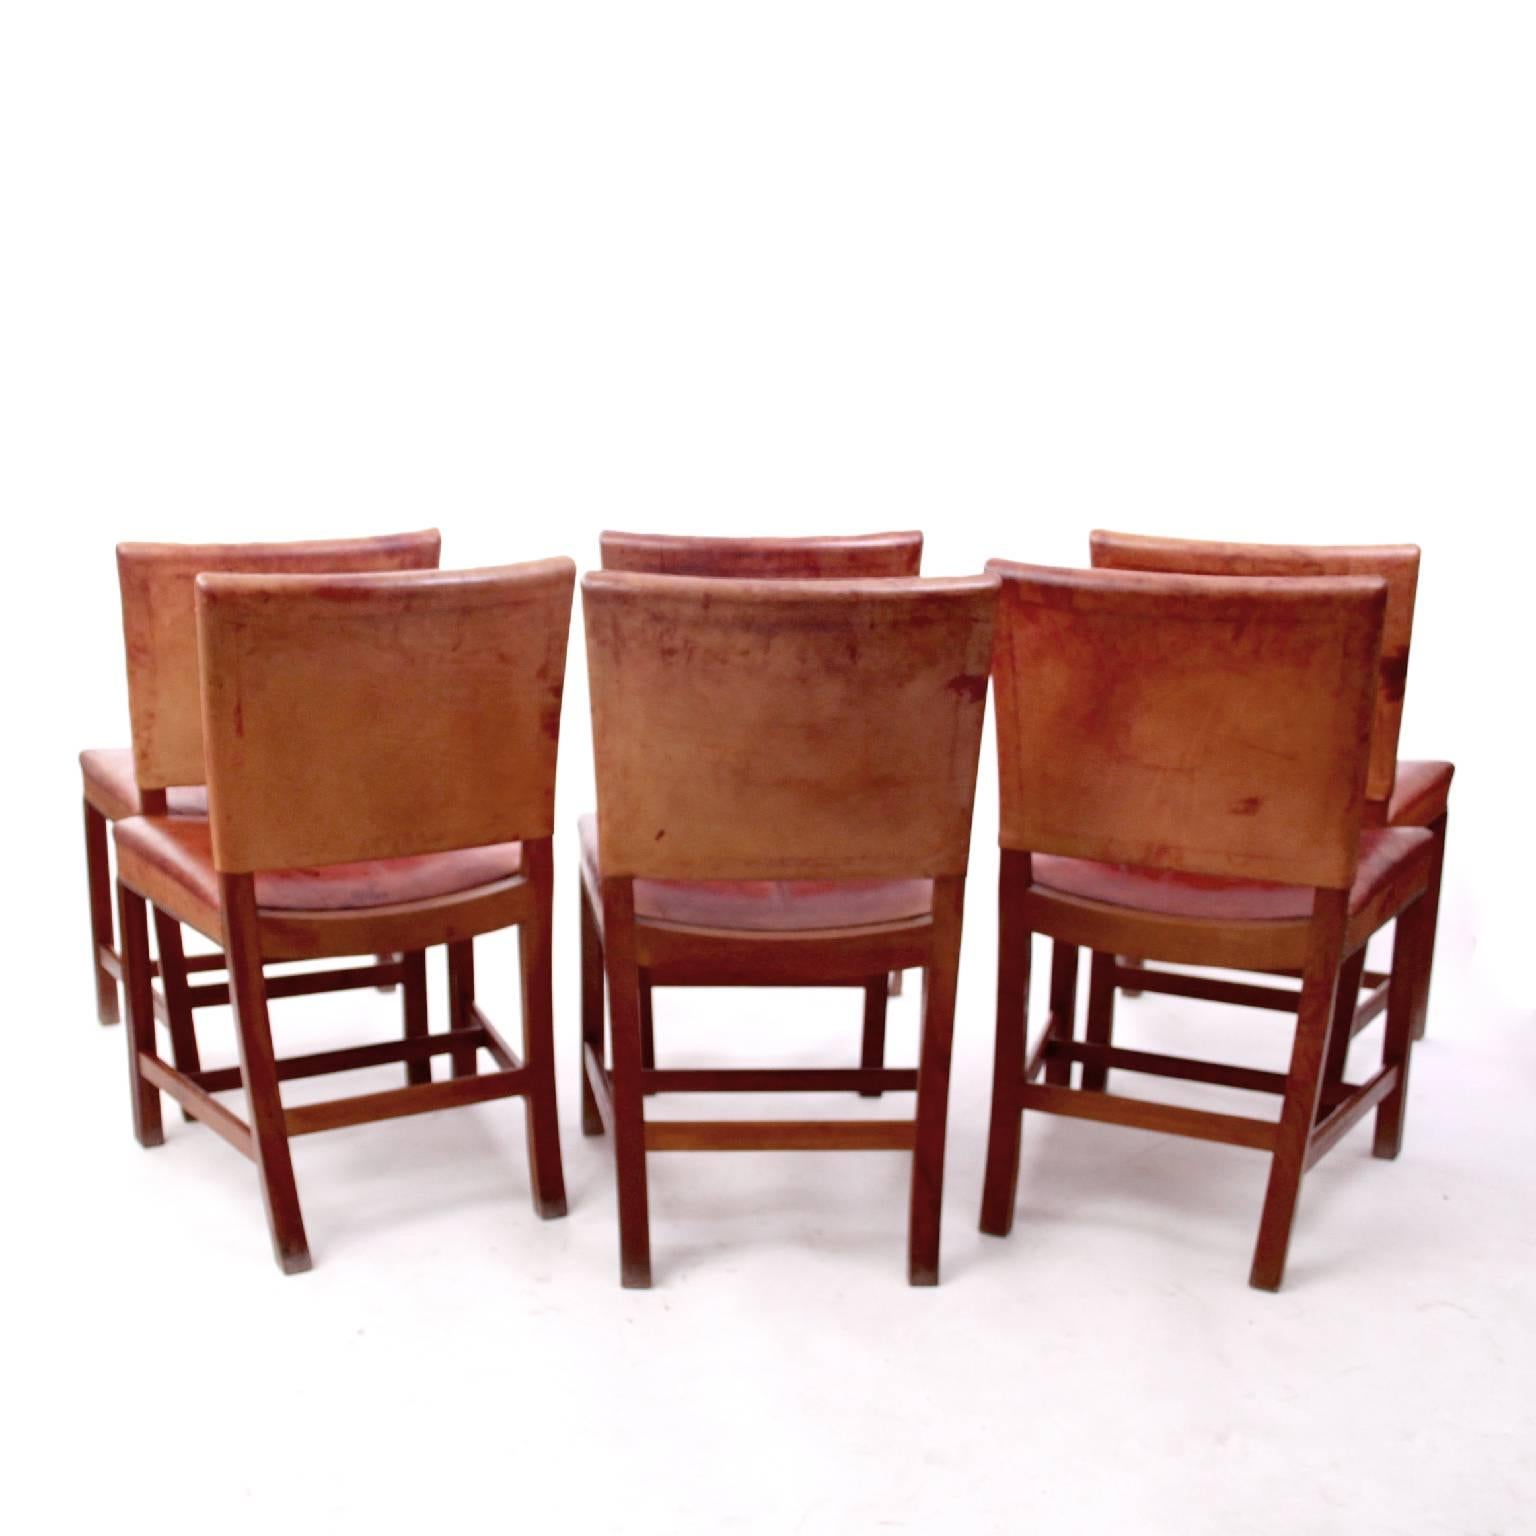 A set of six Kaare Klint 'Red Chairs'. 

Profiled legs of Cuban mahogany, seat and back upholstered with original red leather and fitted with brass nails. 

Designed 1927 for the Danish Museum of Art and Design's lecture hall. 

Executed by